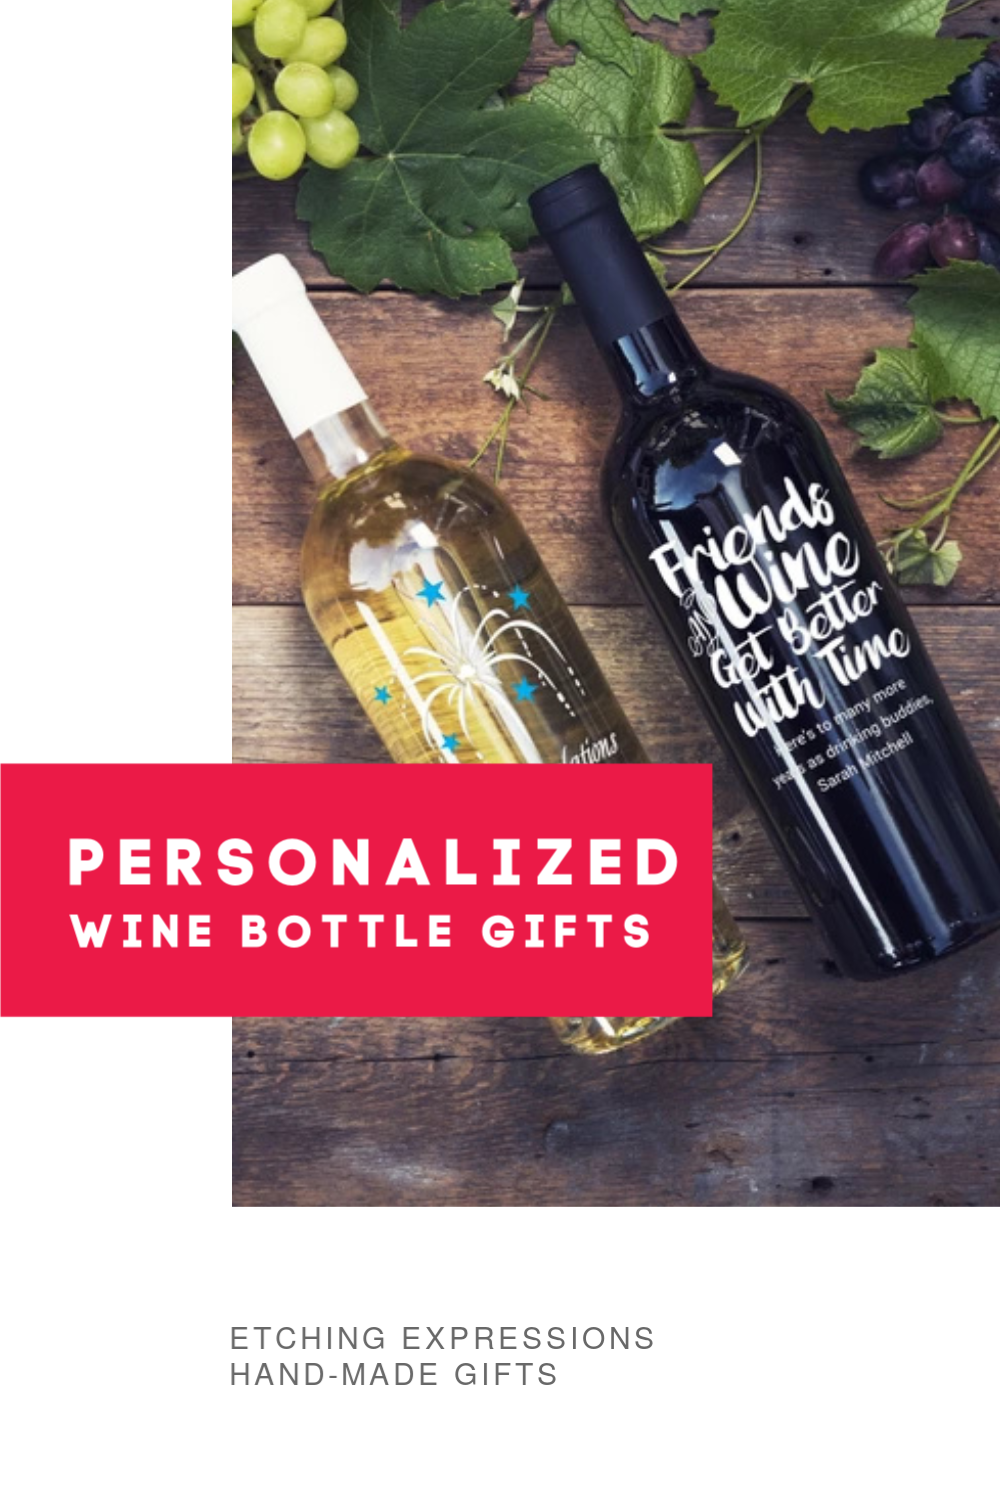 Etching Expressions makes personalized and unforgettable bottles for any special occasion. #customgift #personalizedgifts #winegifts #perfectgift #birthdaygift #customwines #etchingx